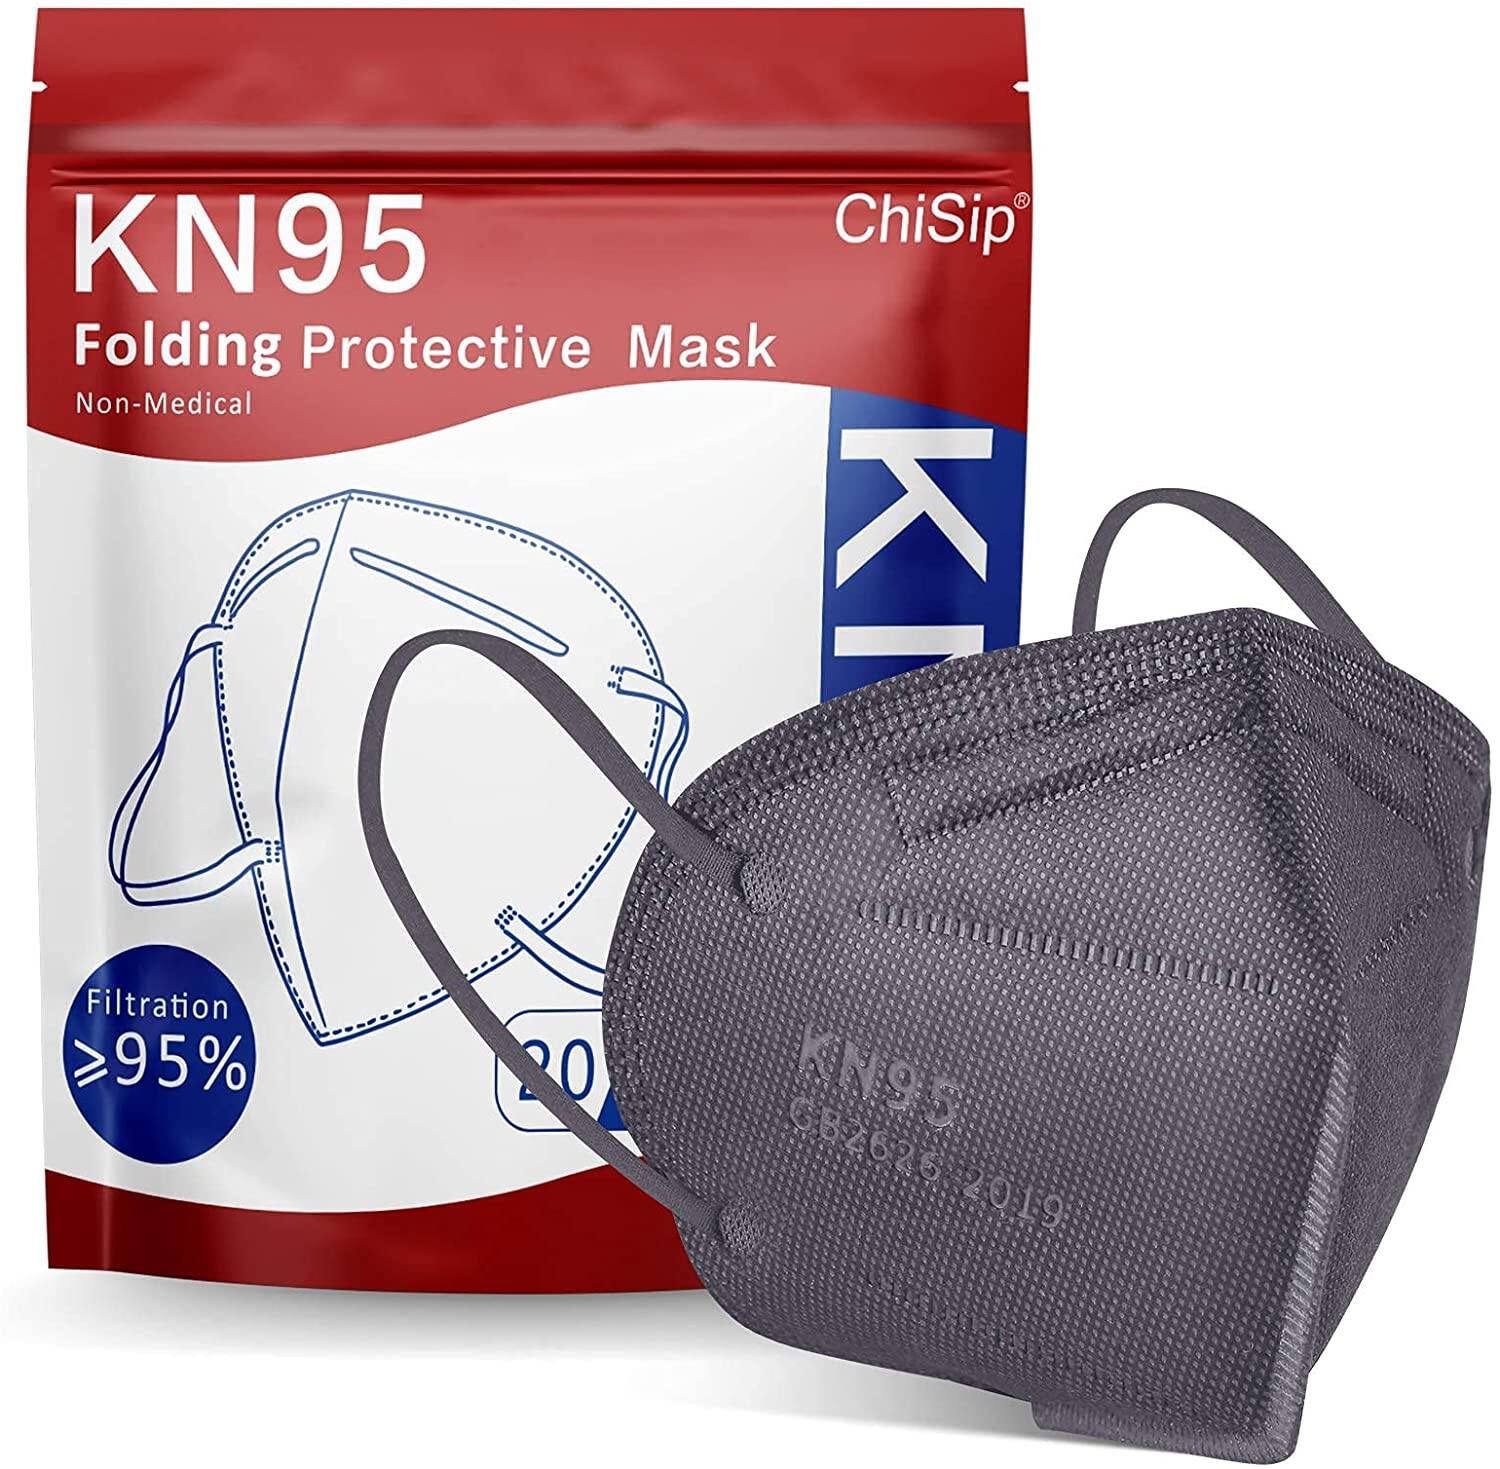 Chisip 20 pcs Gray/White KN95 Face Masks for Men & Women Up to 64%OFF Only $6.47 + free shipping